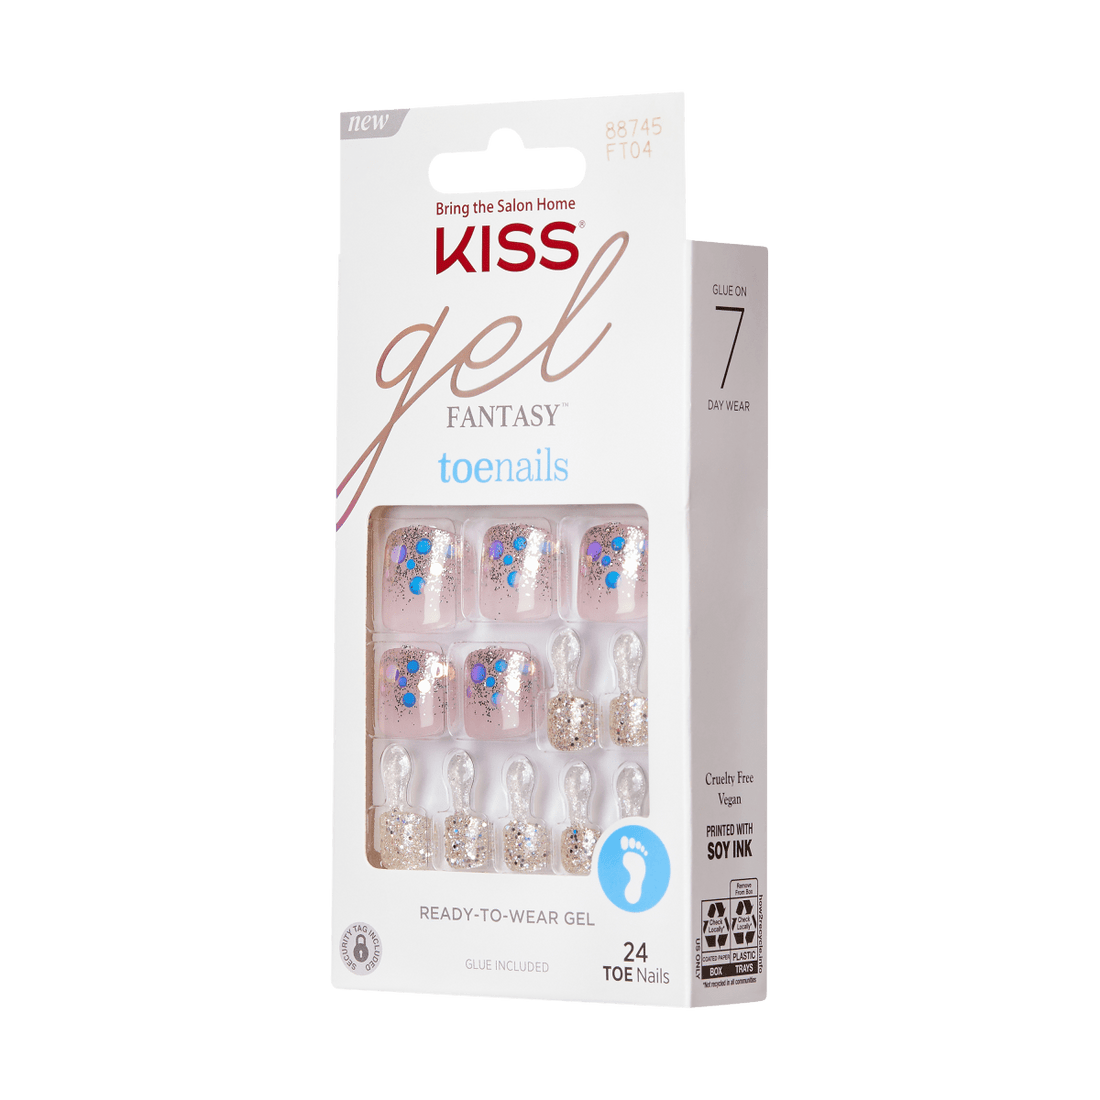 KISS Gel Fantasy, Press-On Nails, Wishing Well, Pink, Short Square, 24ct